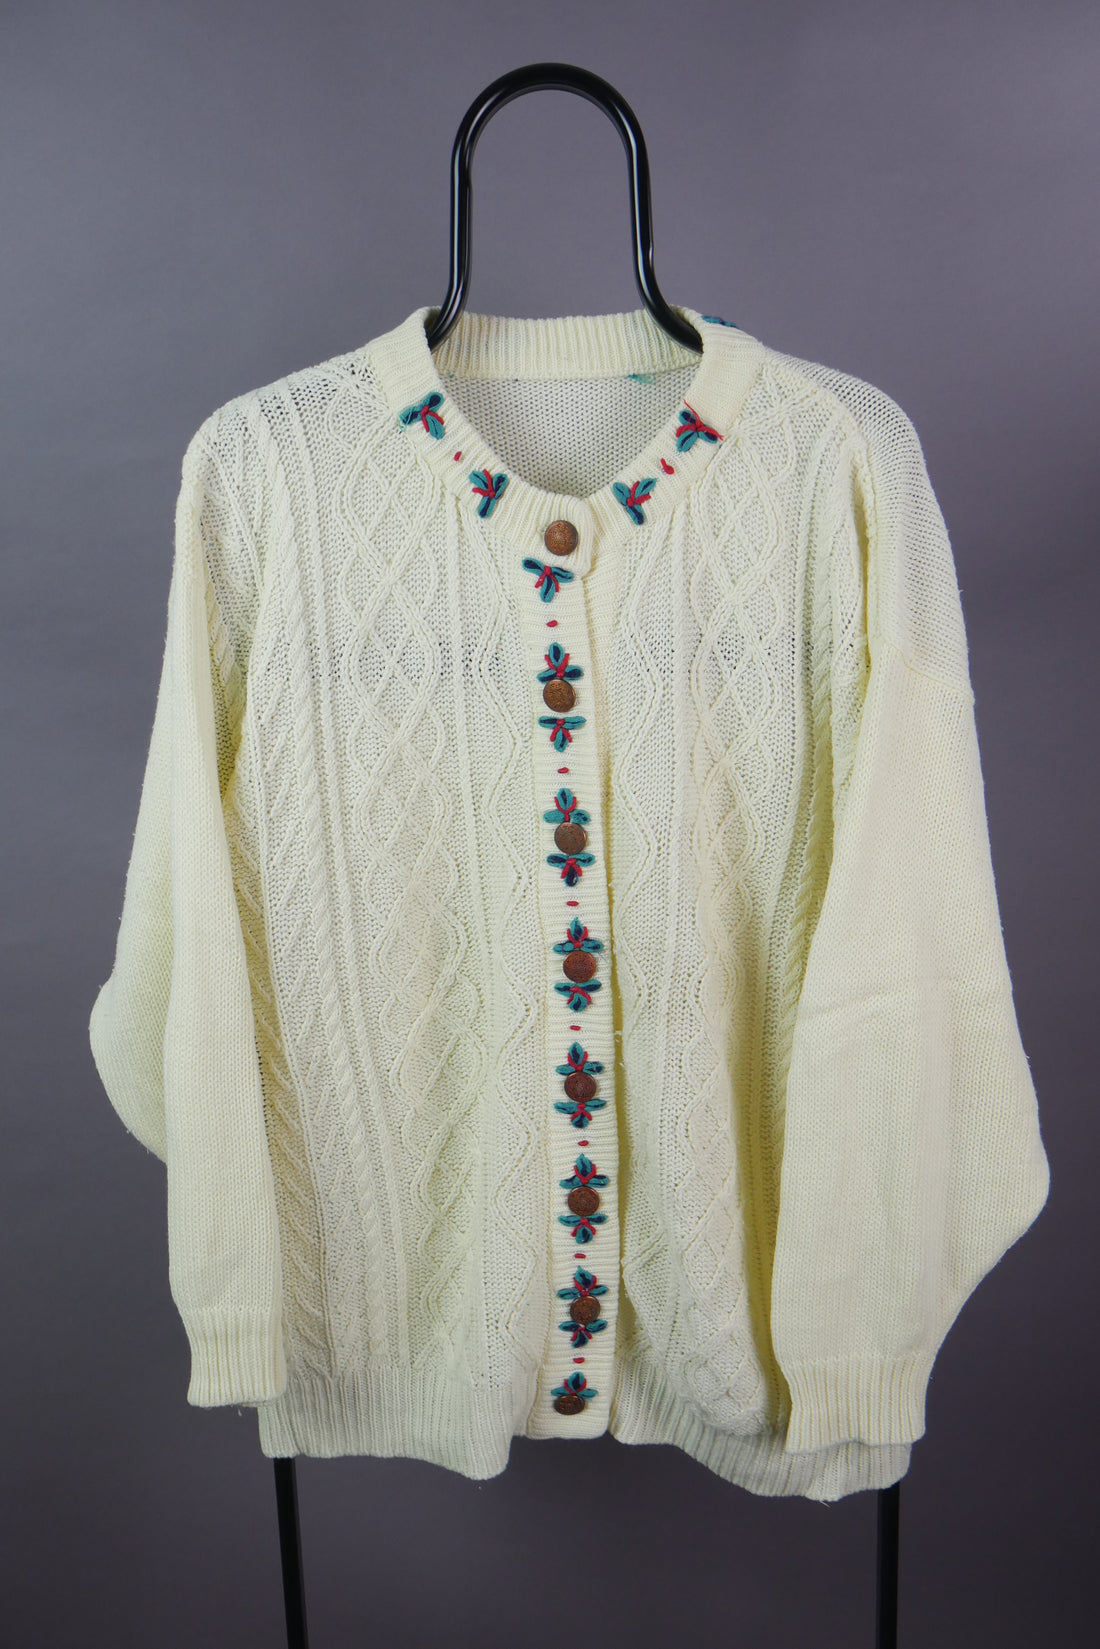 The Vintage Embroidered Cable Knit Cardigan (Women's L)